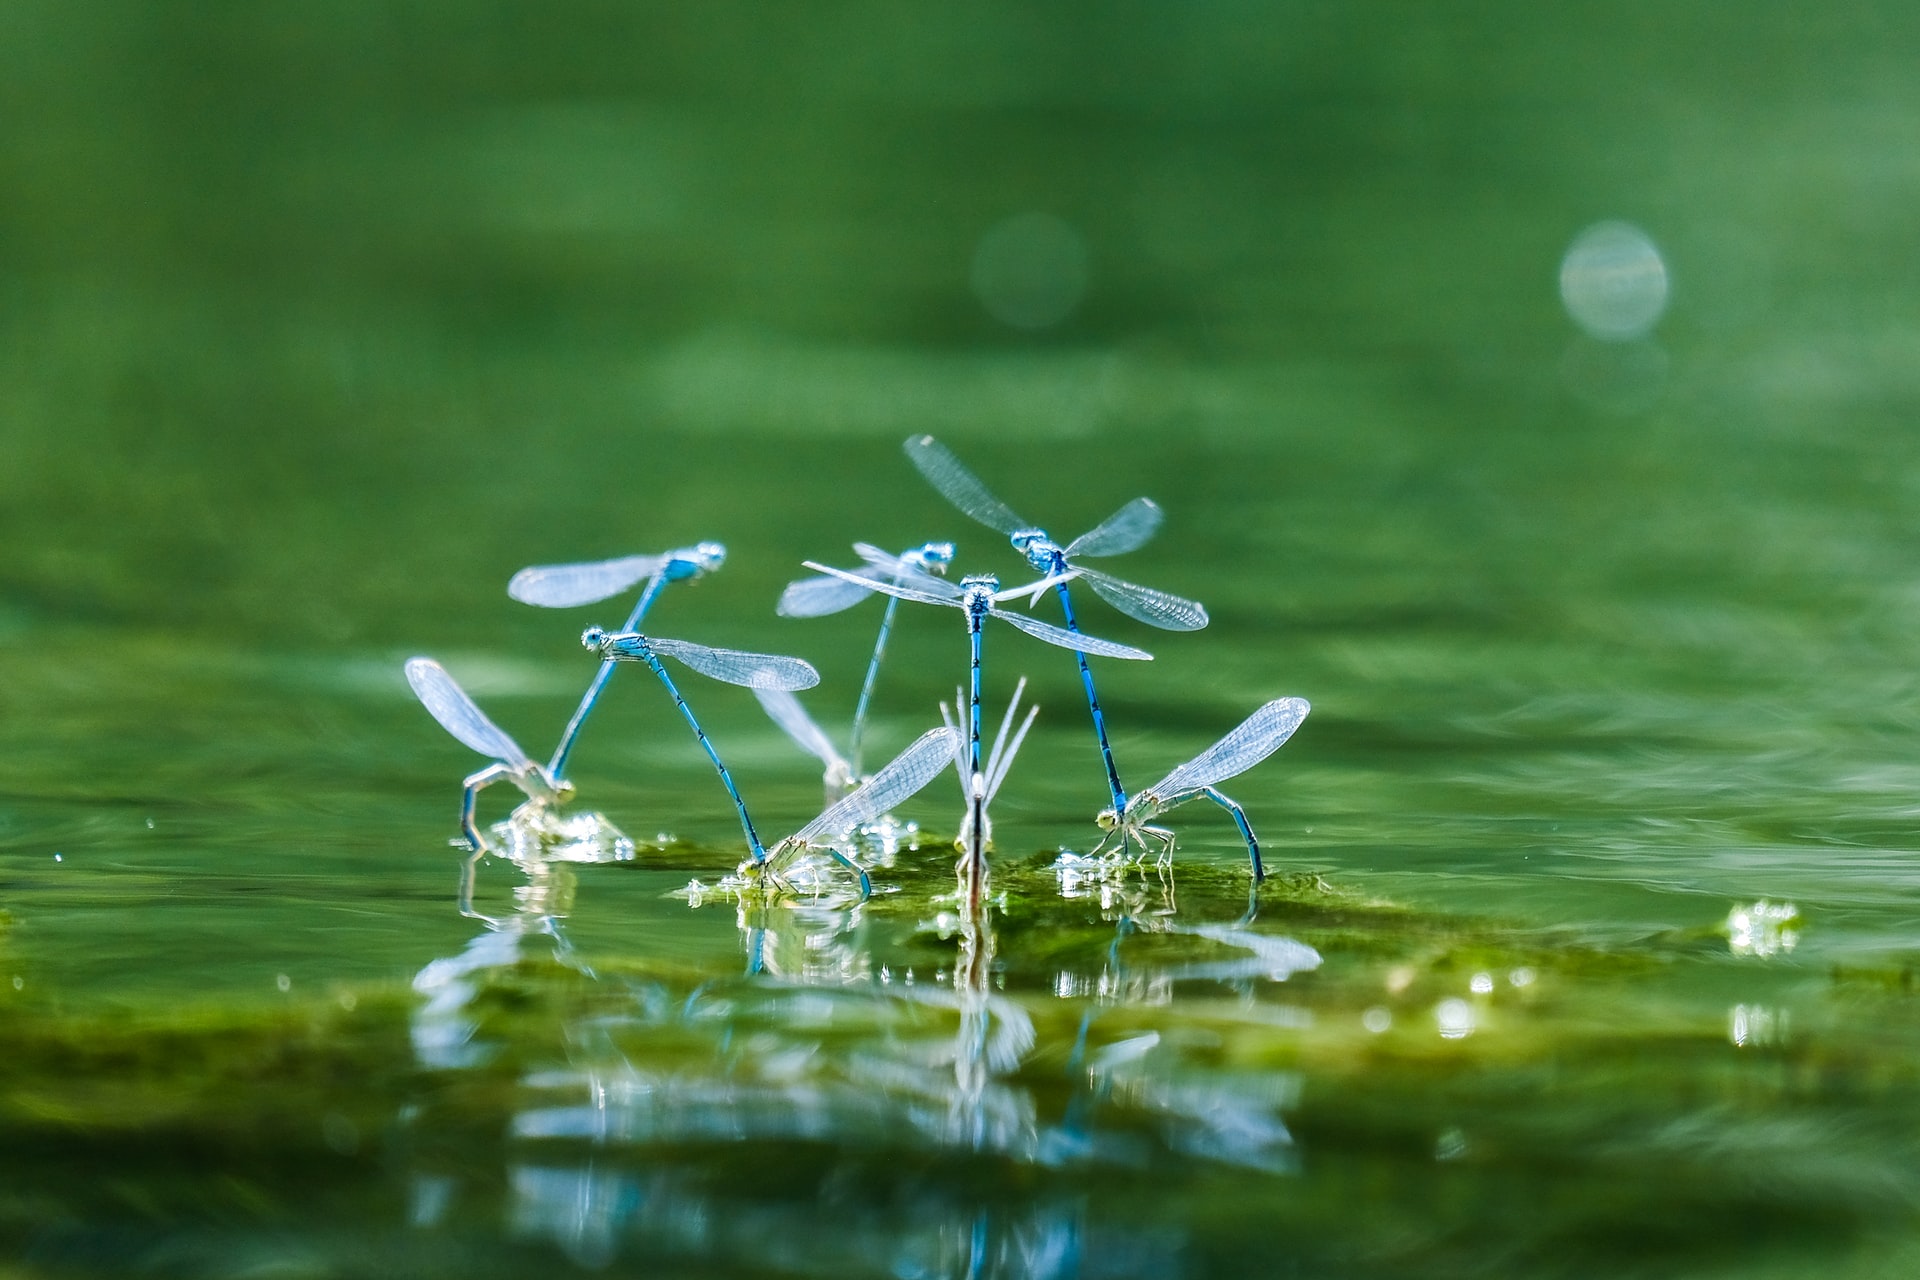 Dragonflies dancing on the water